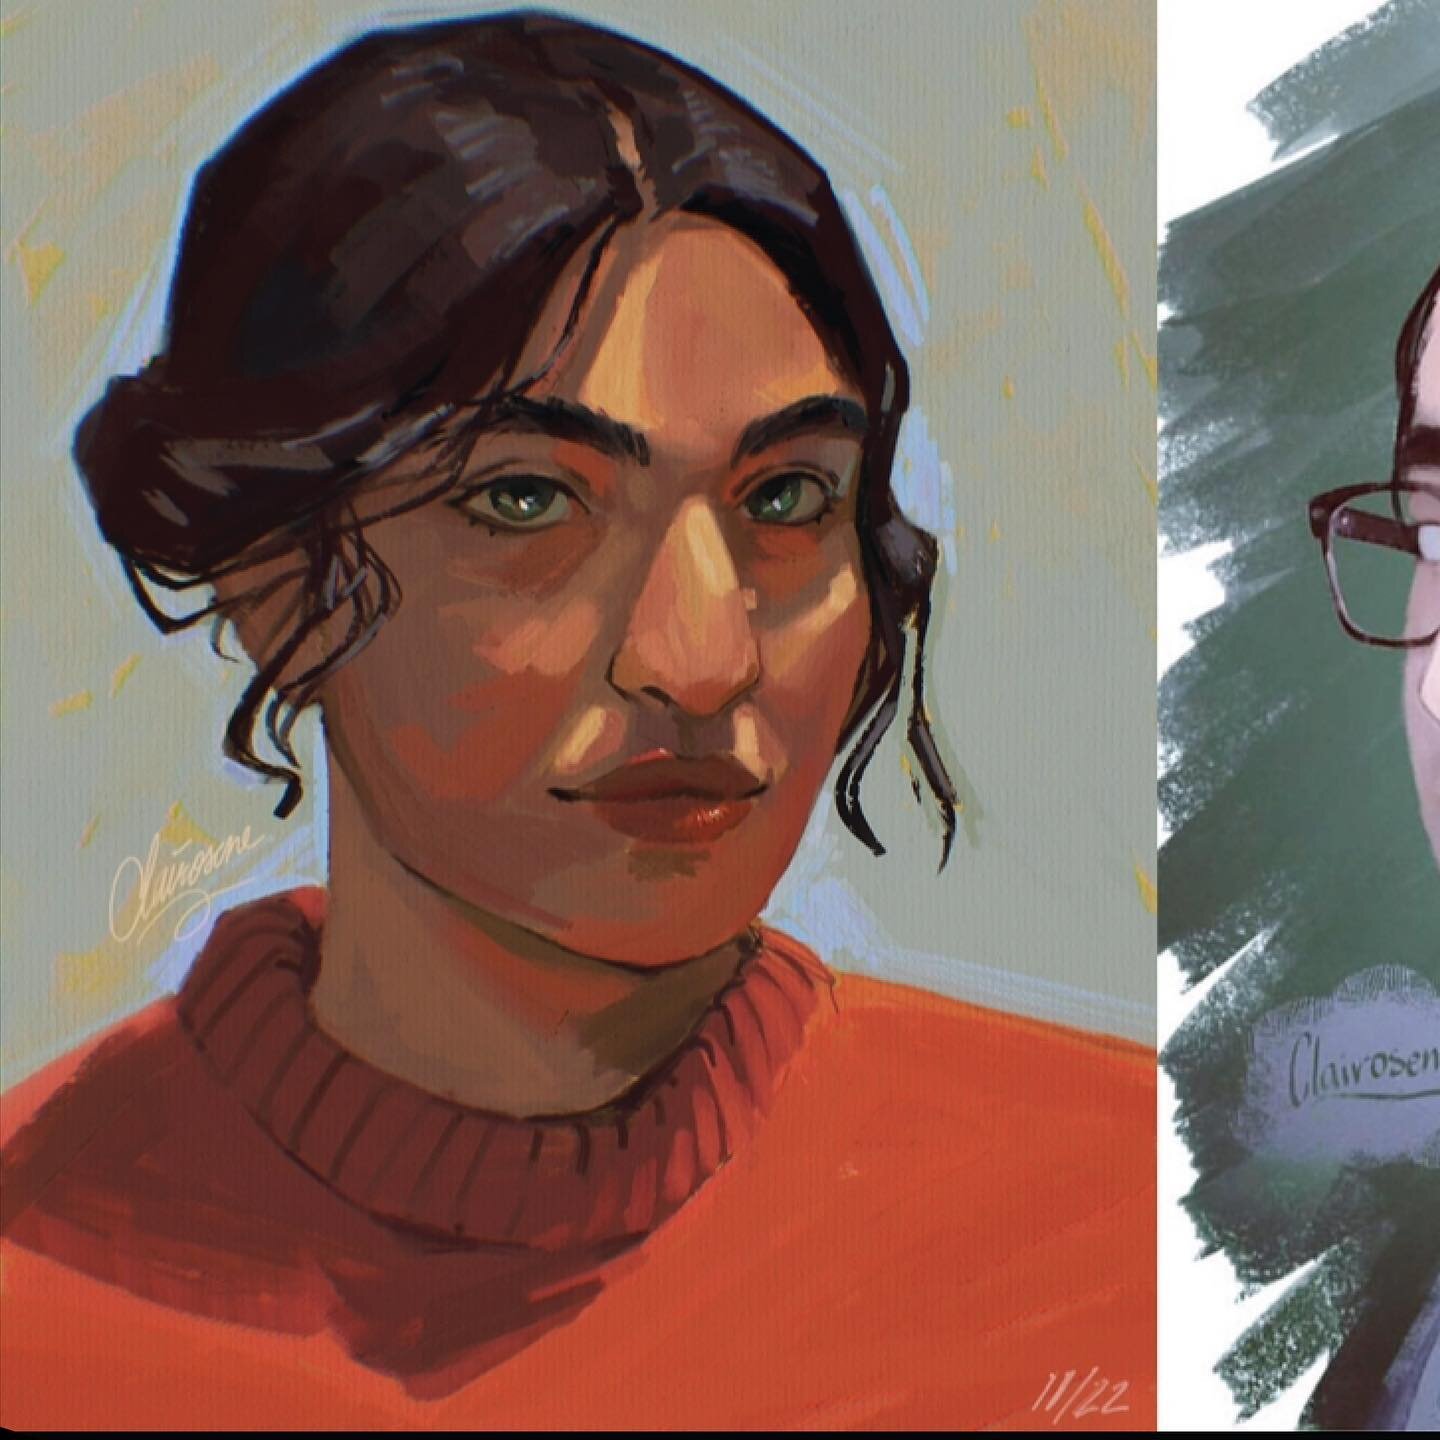 Some things I've been doing
&bull;
Starting with a self portrait redraw